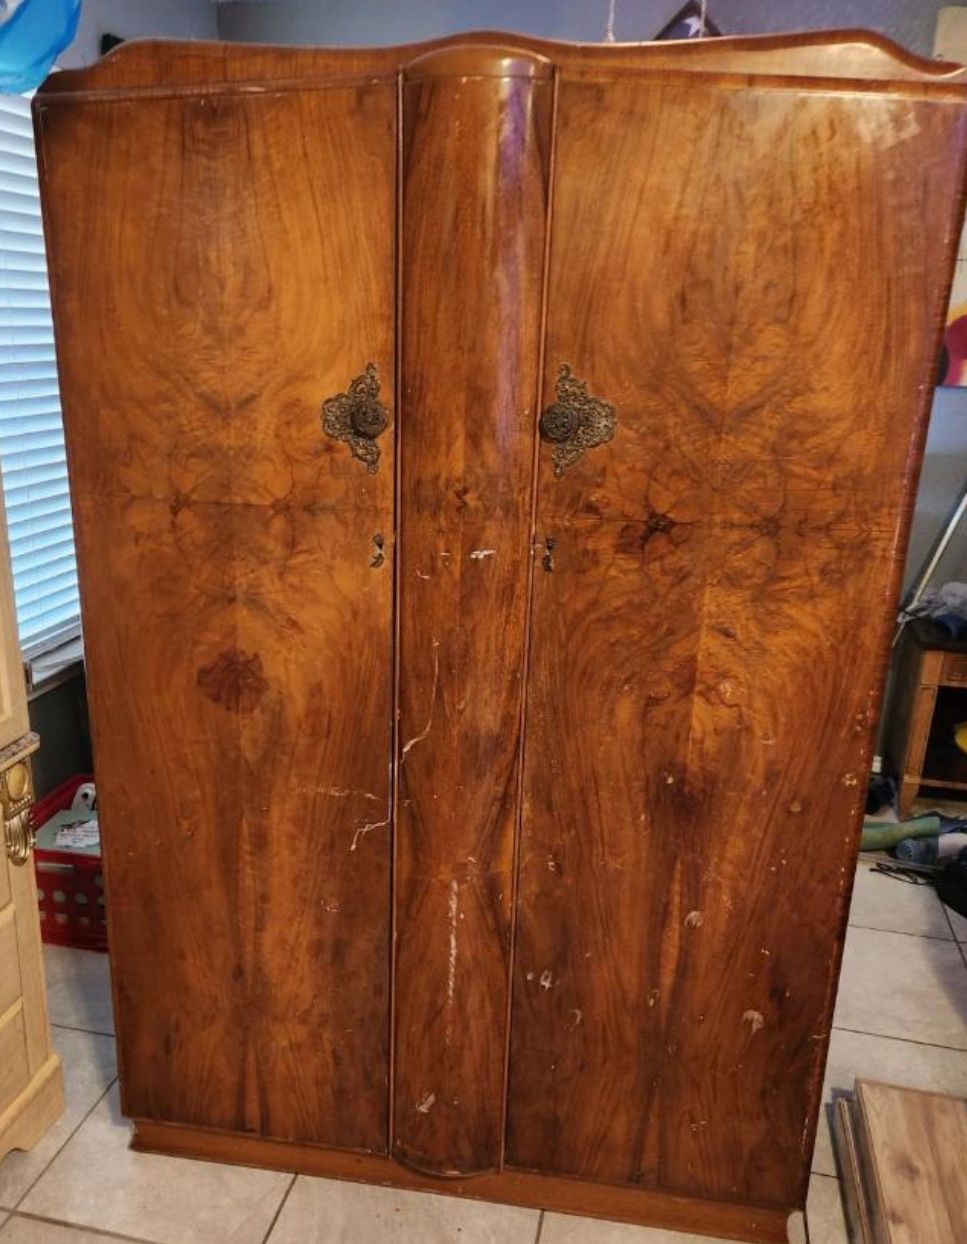 Antique Armoire  MUST GO! PRICE LOWERED TO SELL!